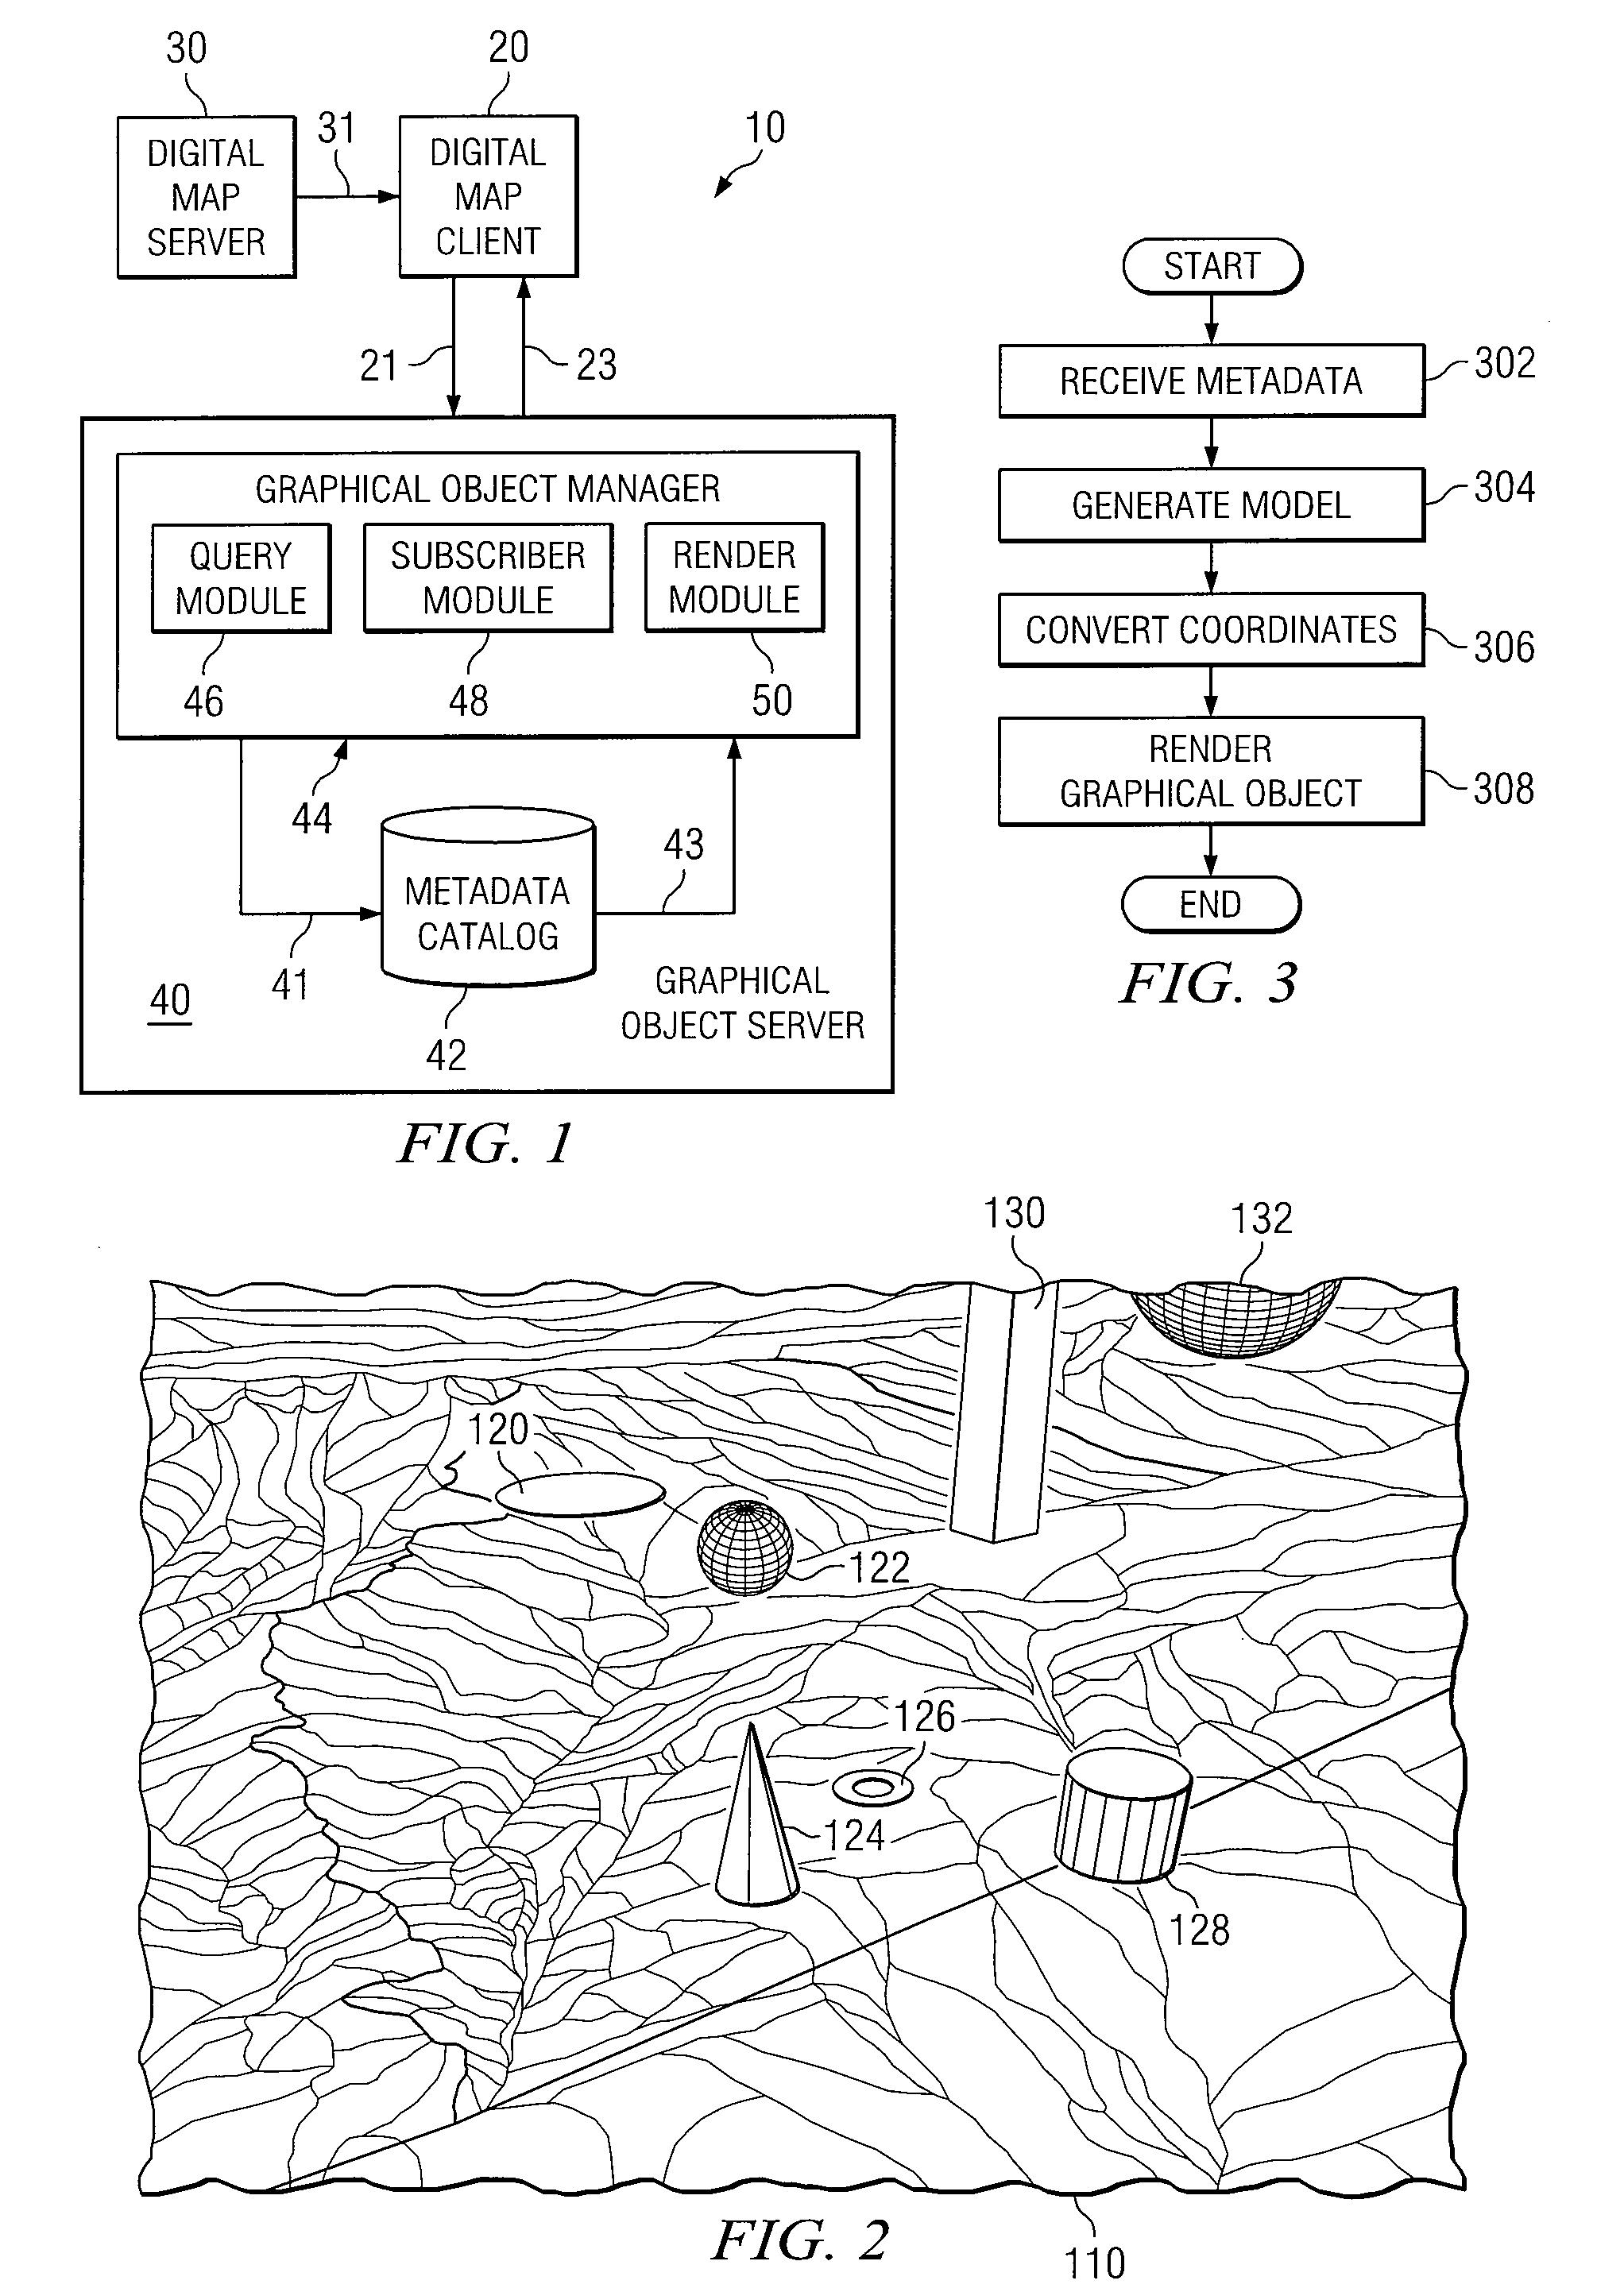 Method and System for Displaying Graphical Objects on a Digital Map